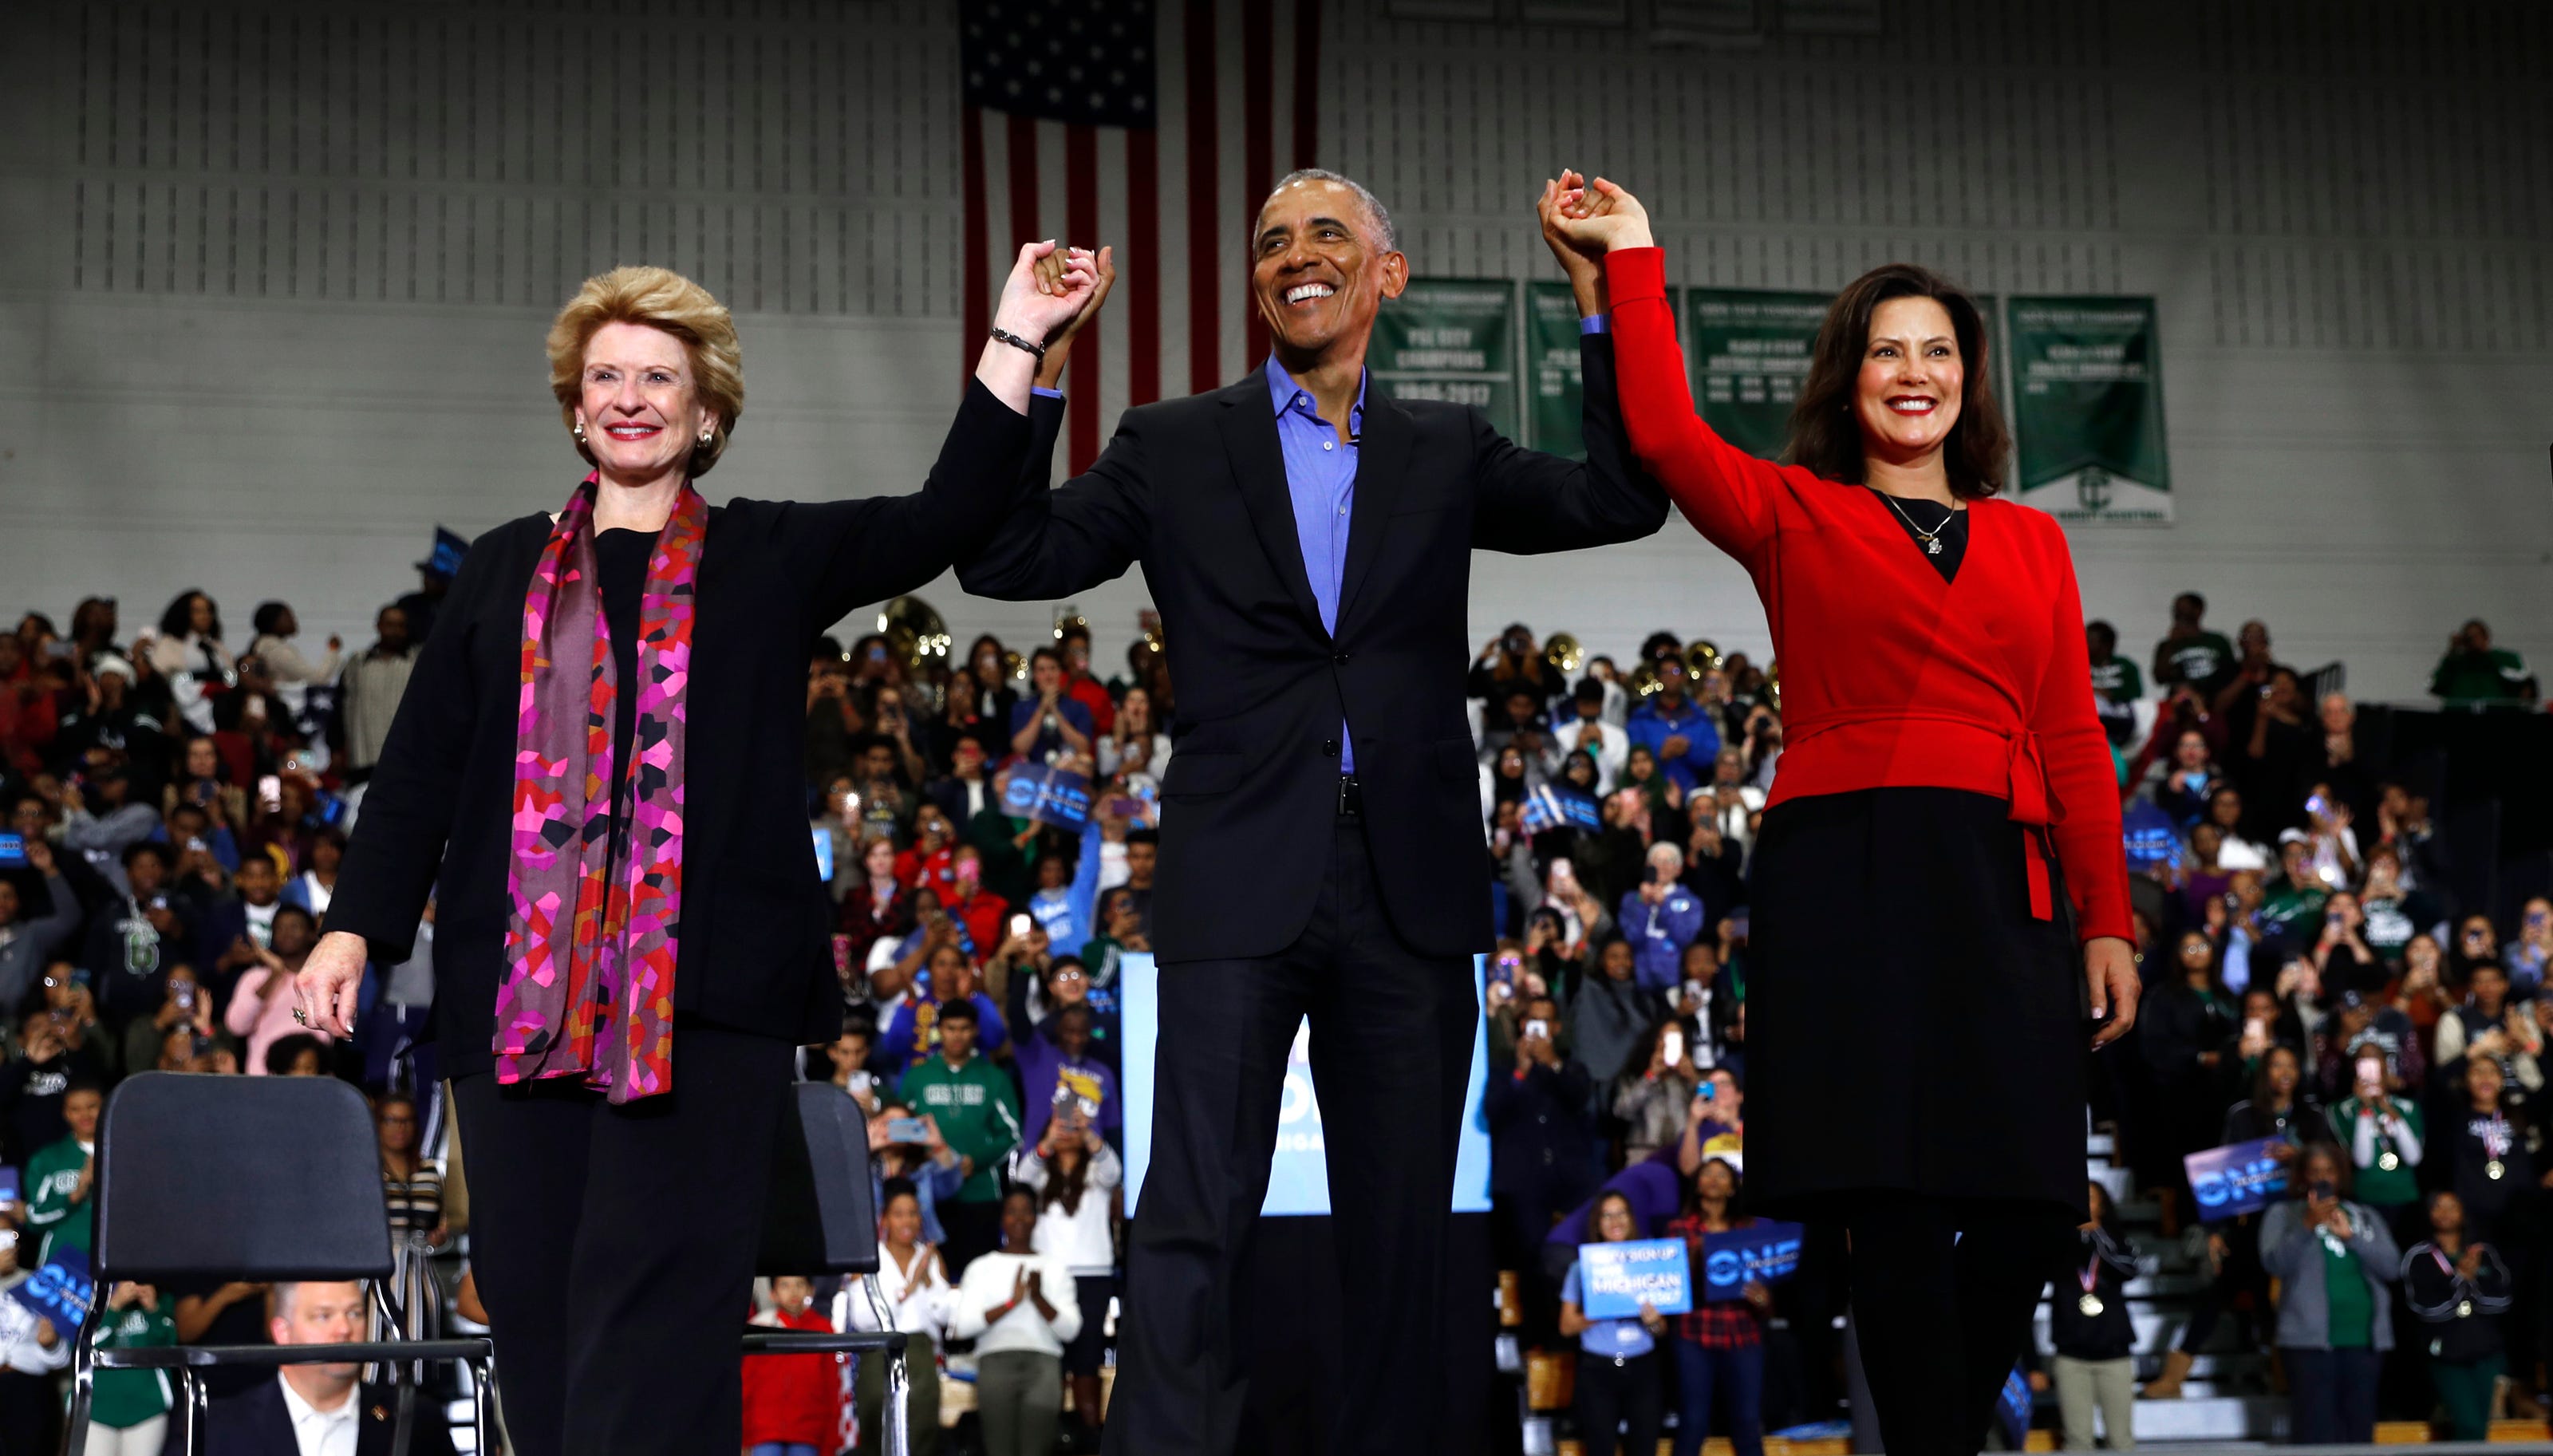 Obama headed to Michigan to campaign for Whitmer, other Democrats